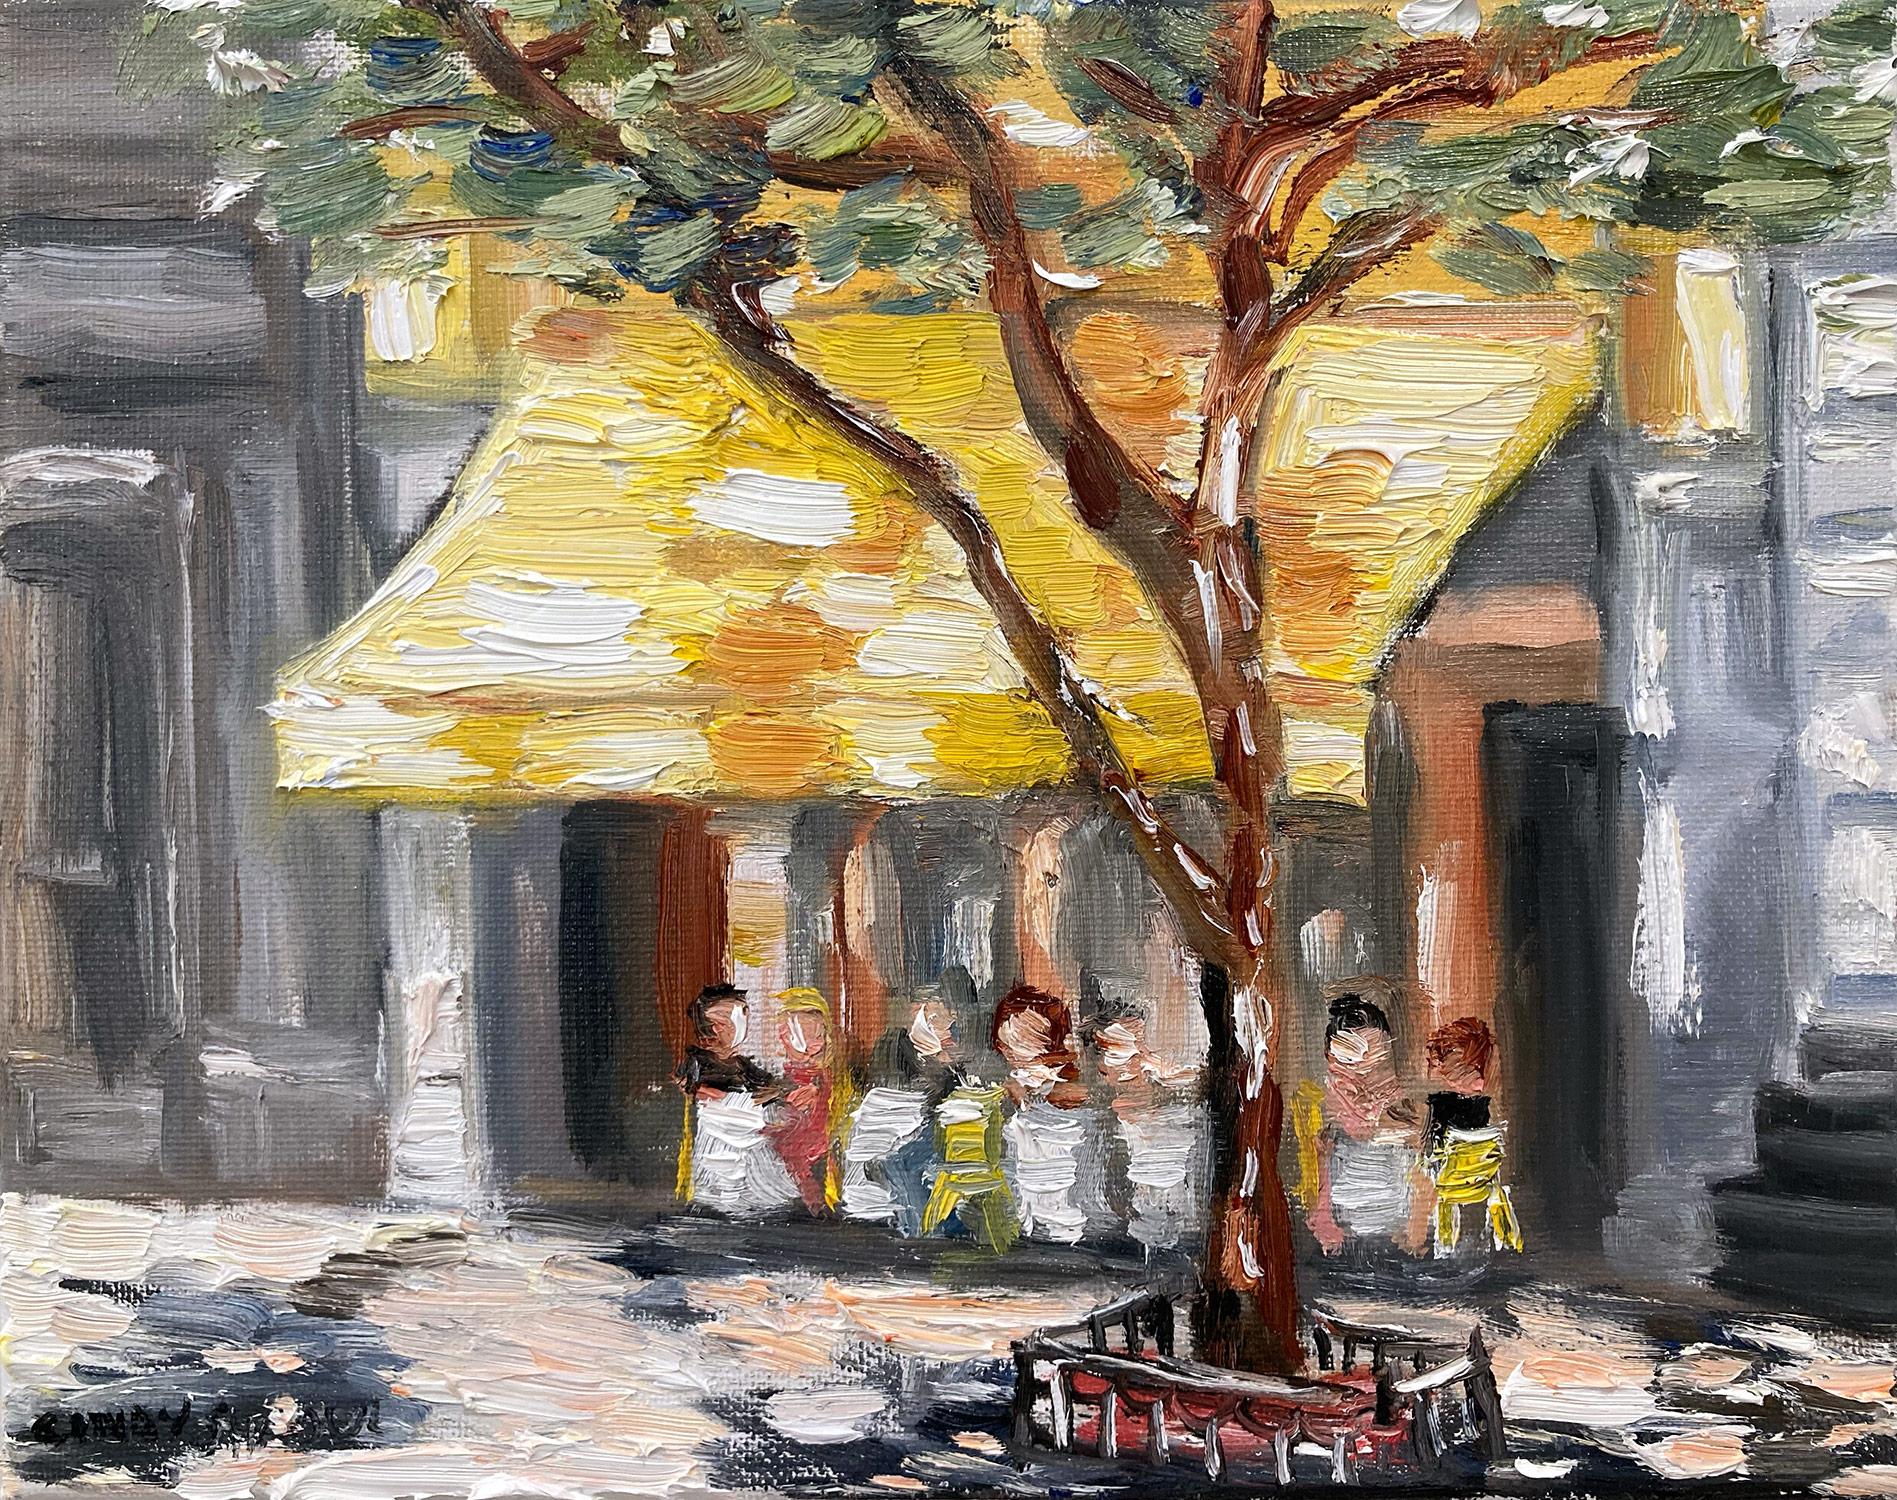 Cindy Shaoul Figurative Painting - "Brunch at Cipriani" Plein Air Restaurant Oil Painting in Soho New York City